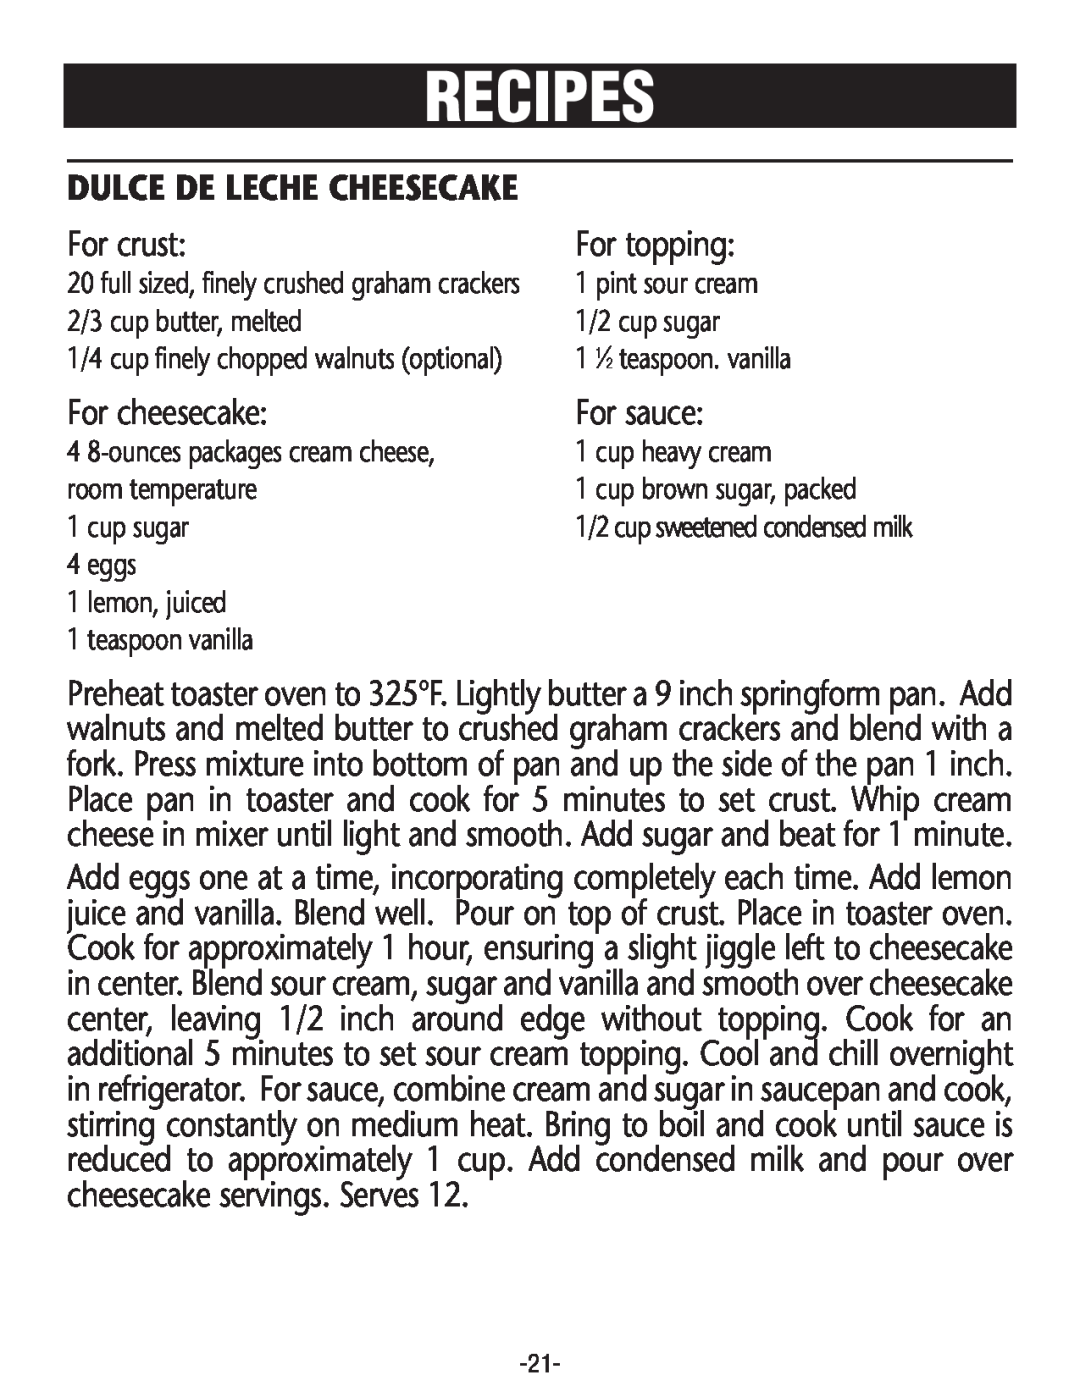 Rival CO606 manual Dulce De Leche Cheesecake, Recipes, For crust, For topping, For cheesecake, For sauce 